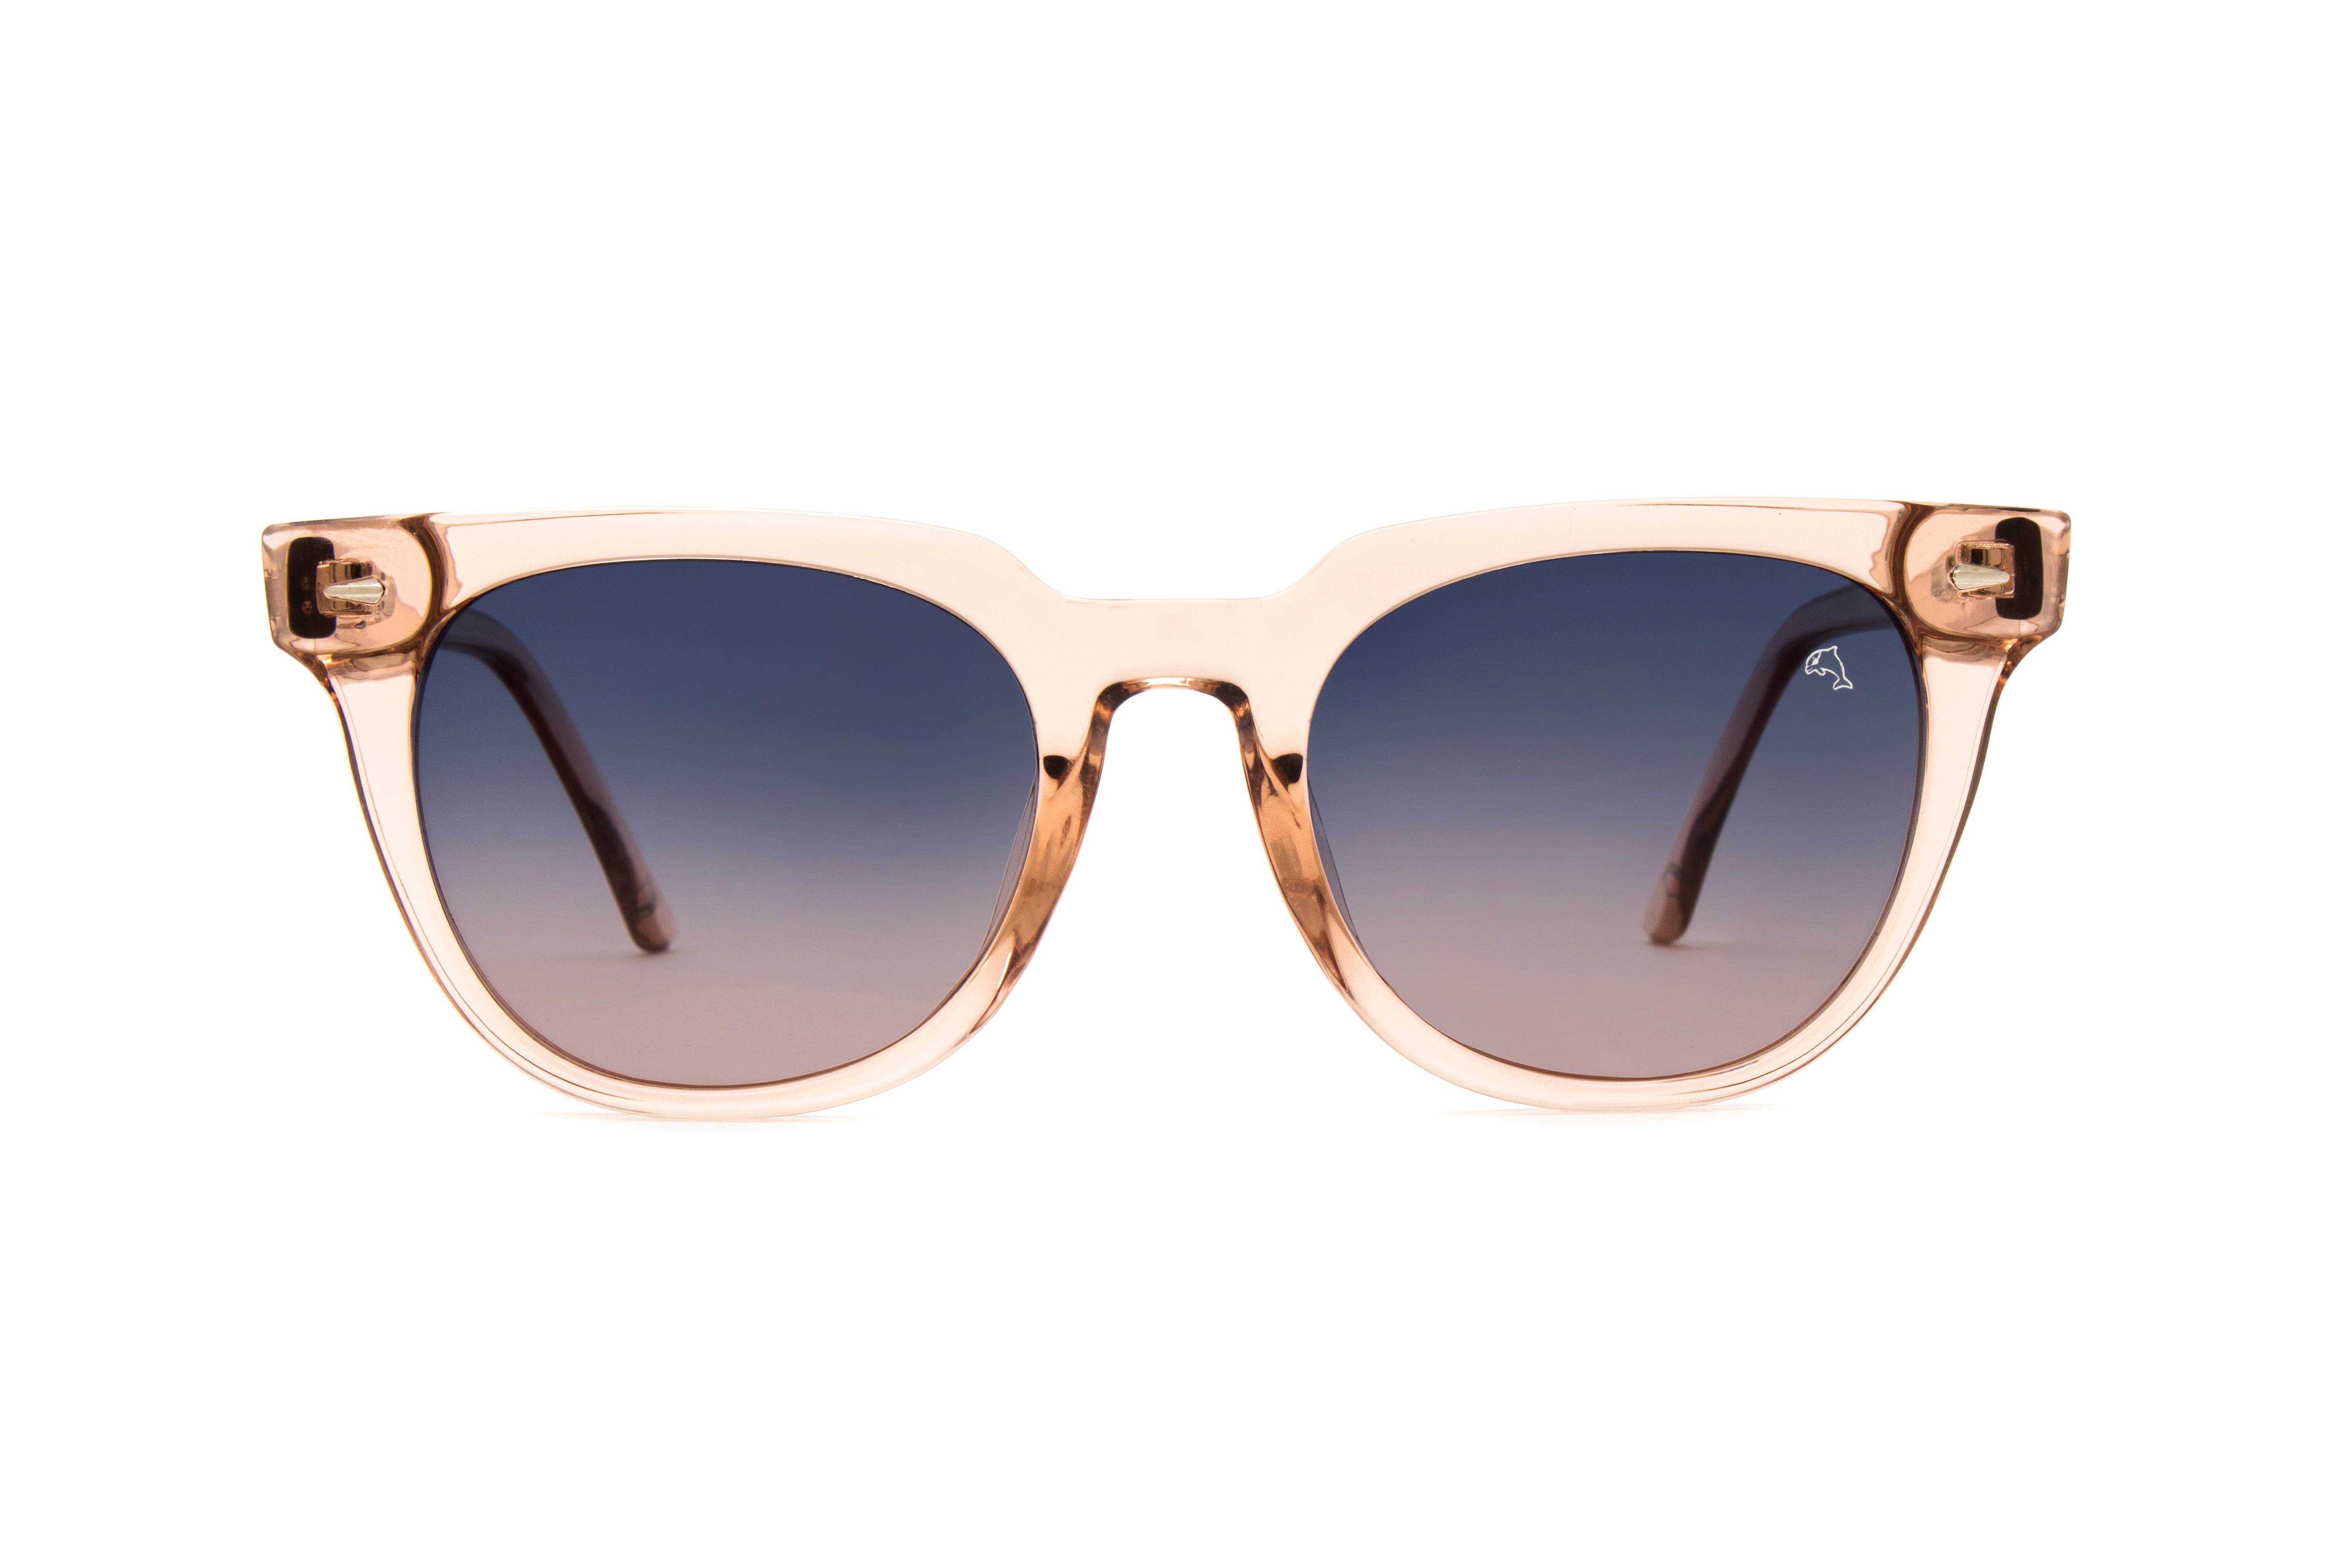 Biscayners Sunglasses |  Sunset Nude